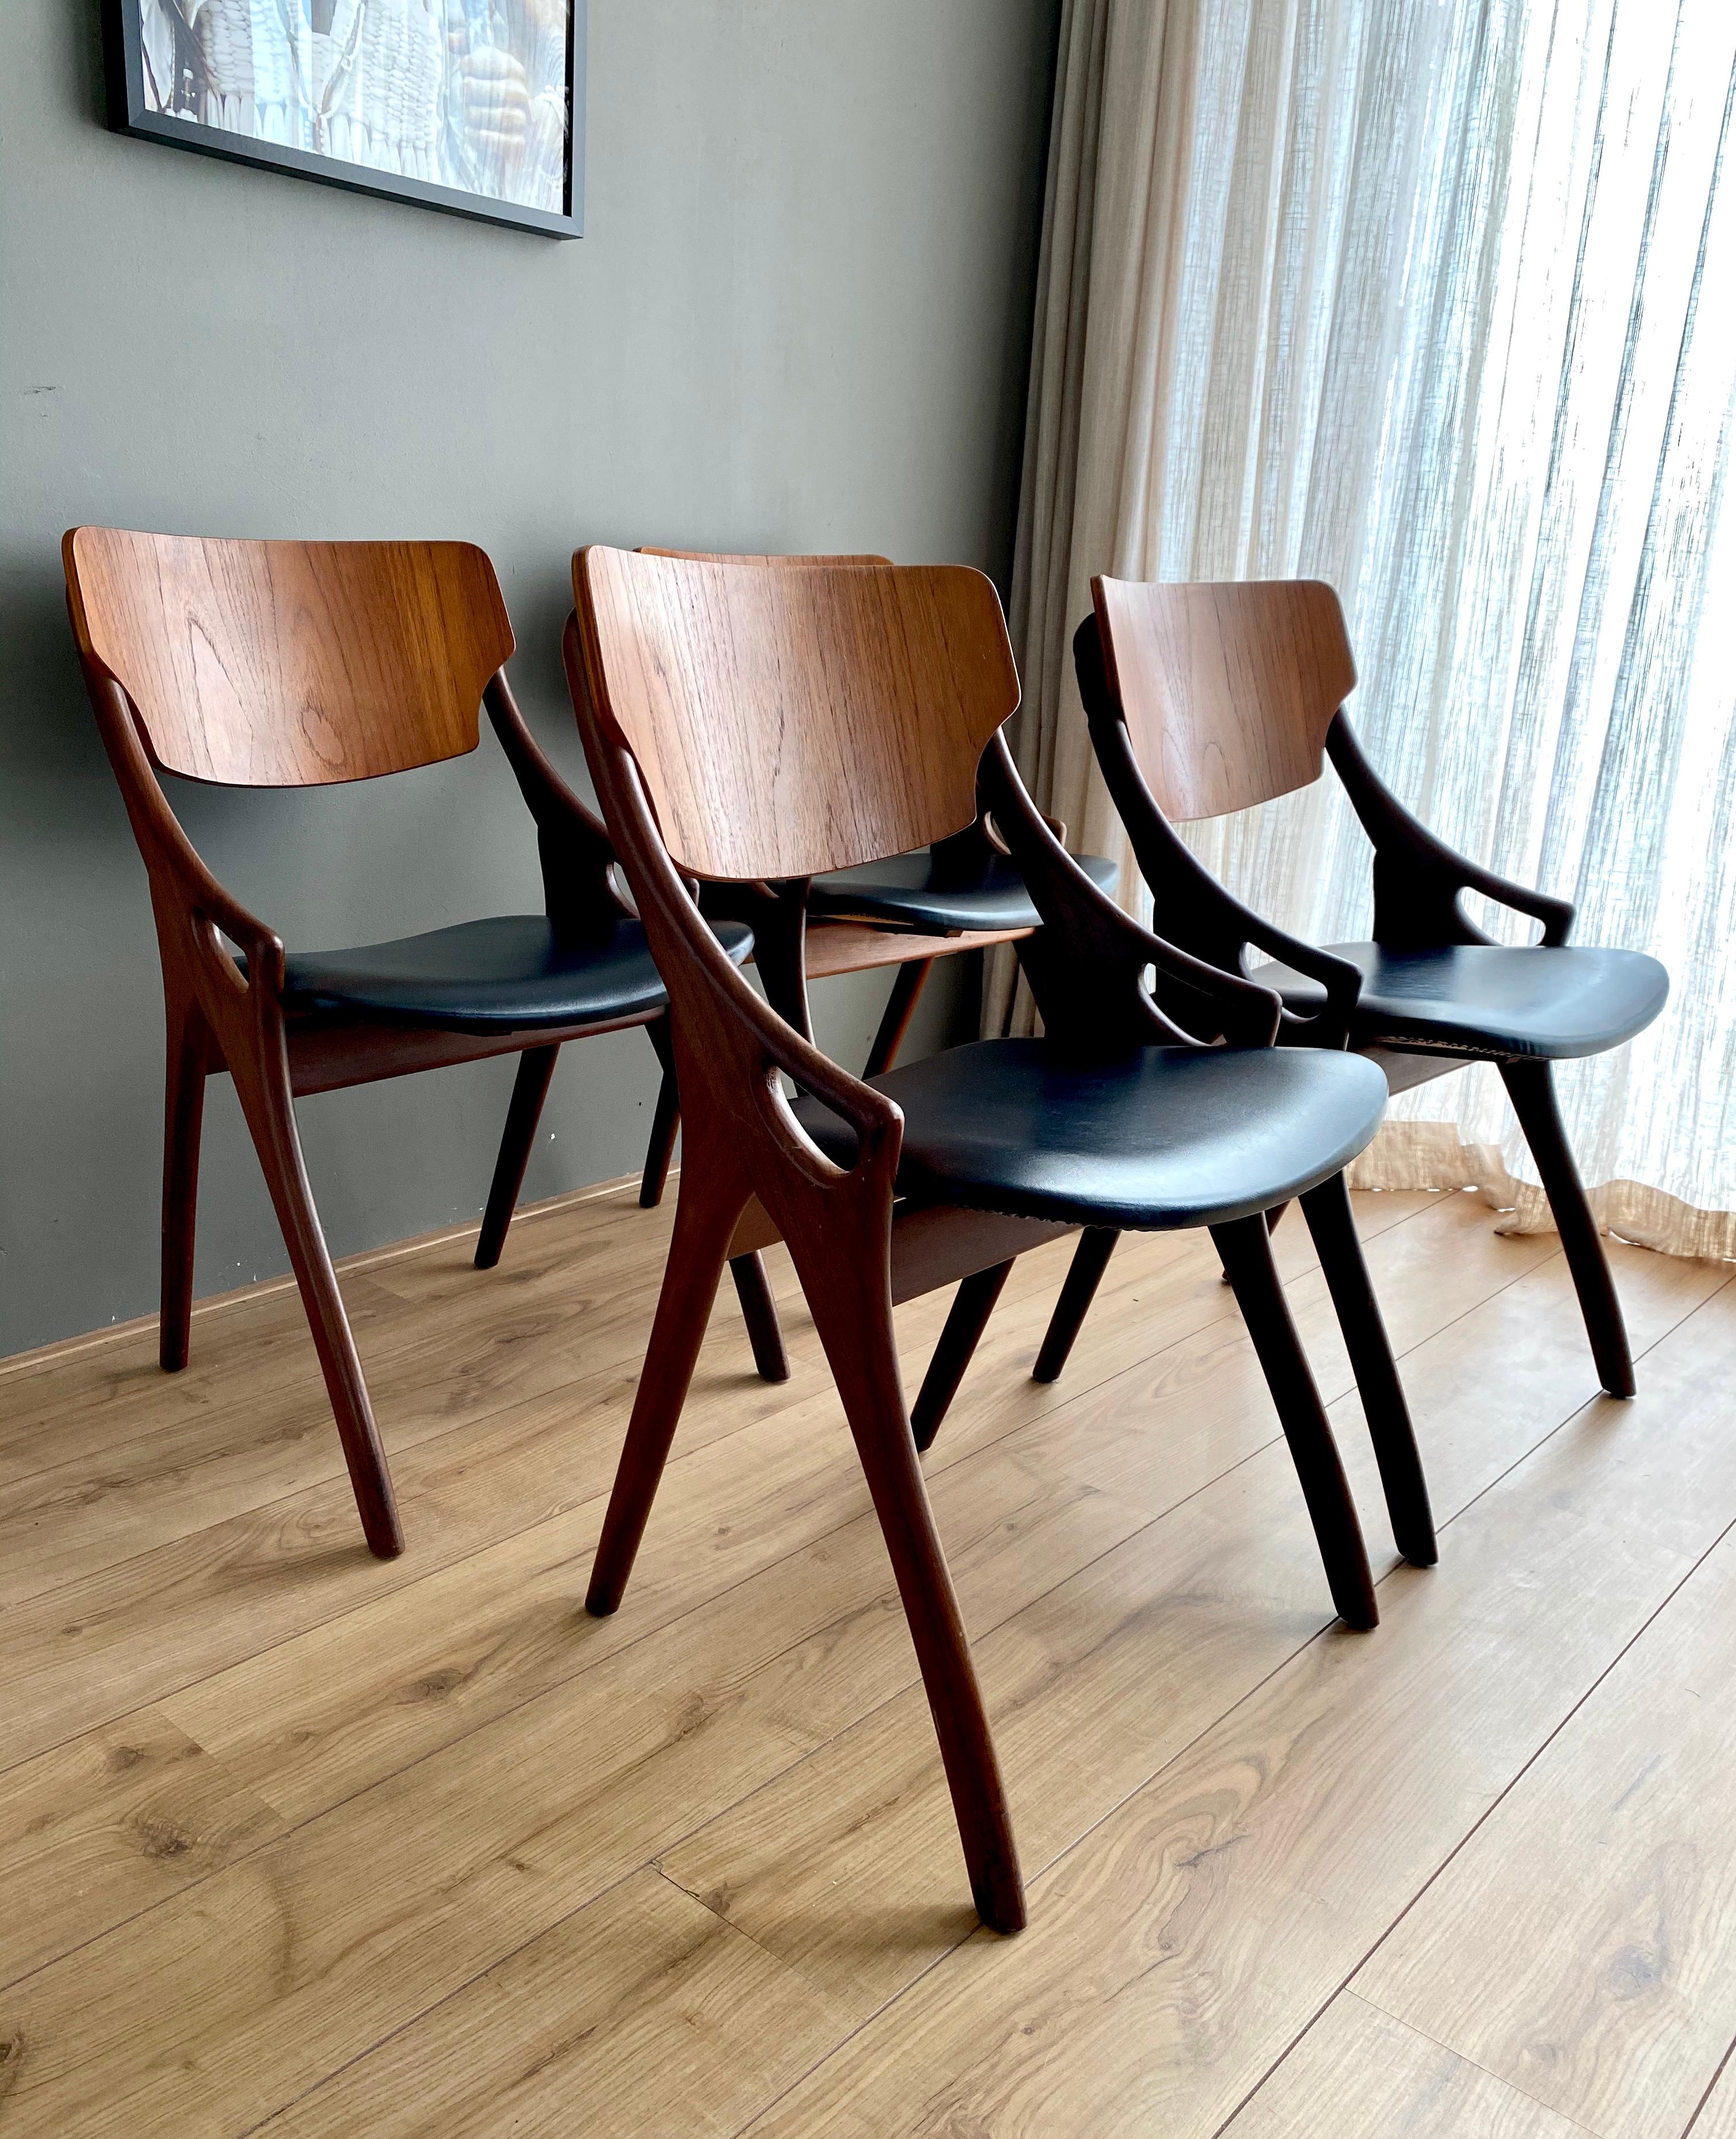 Absolutely stunning set of four dining room chairs, designed by Arne Hovmand Olsen for Mogens Kold Mobelfabrik, Denmark. The chairs feature a warm colored teak base with the original Black Leatherette upholstery. Little wear consistent with age and